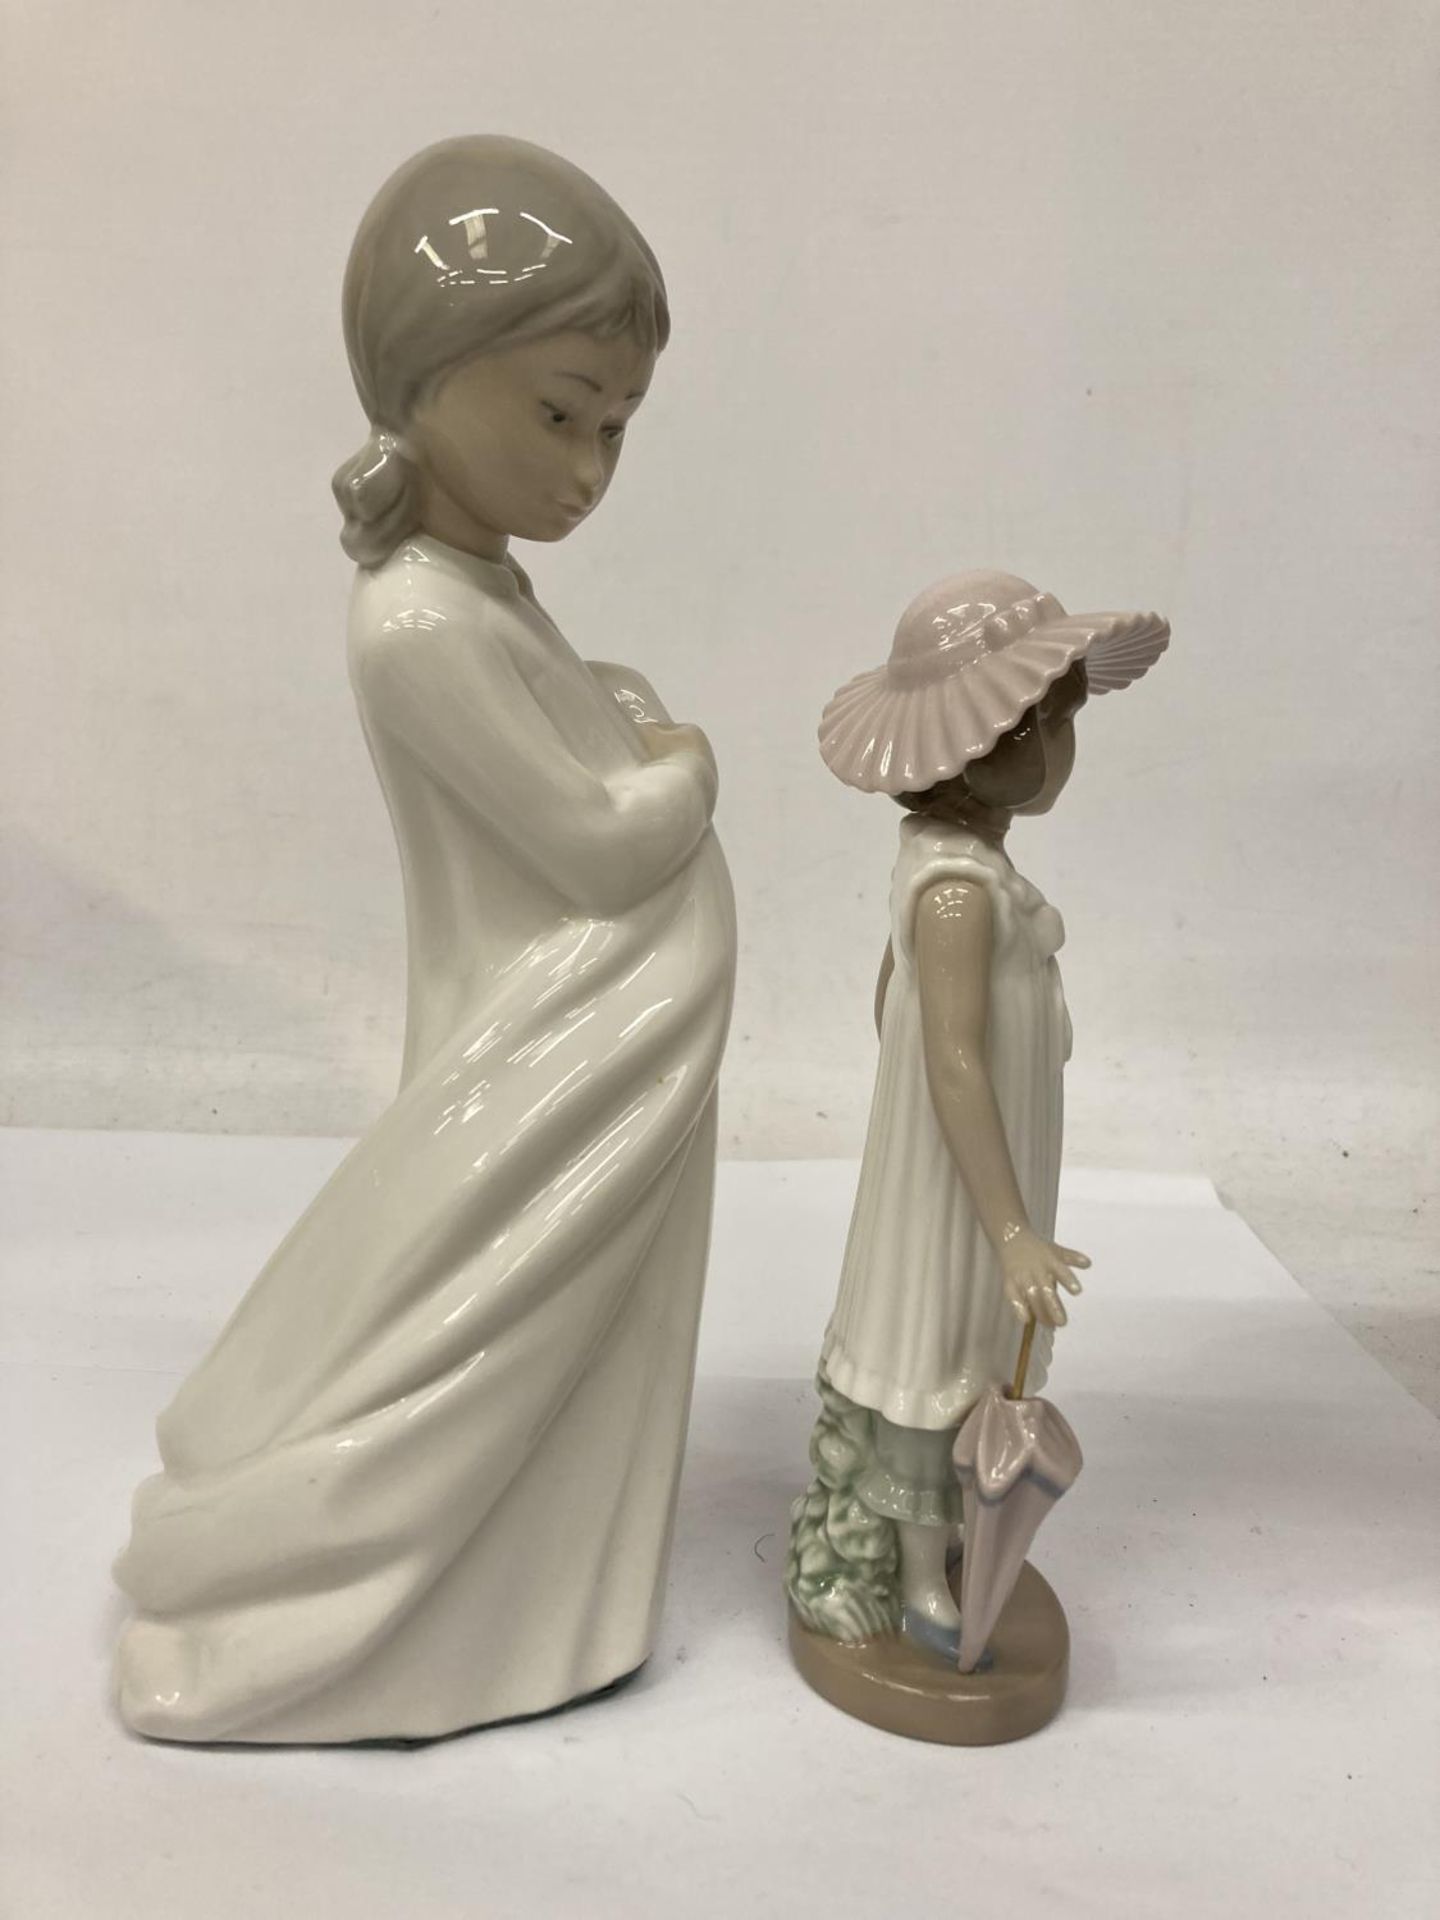 TWO NAO FIGURINES ONE HOLDING A BLANKET AND THE OTHER AN UMBRELLA - Image 3 of 7